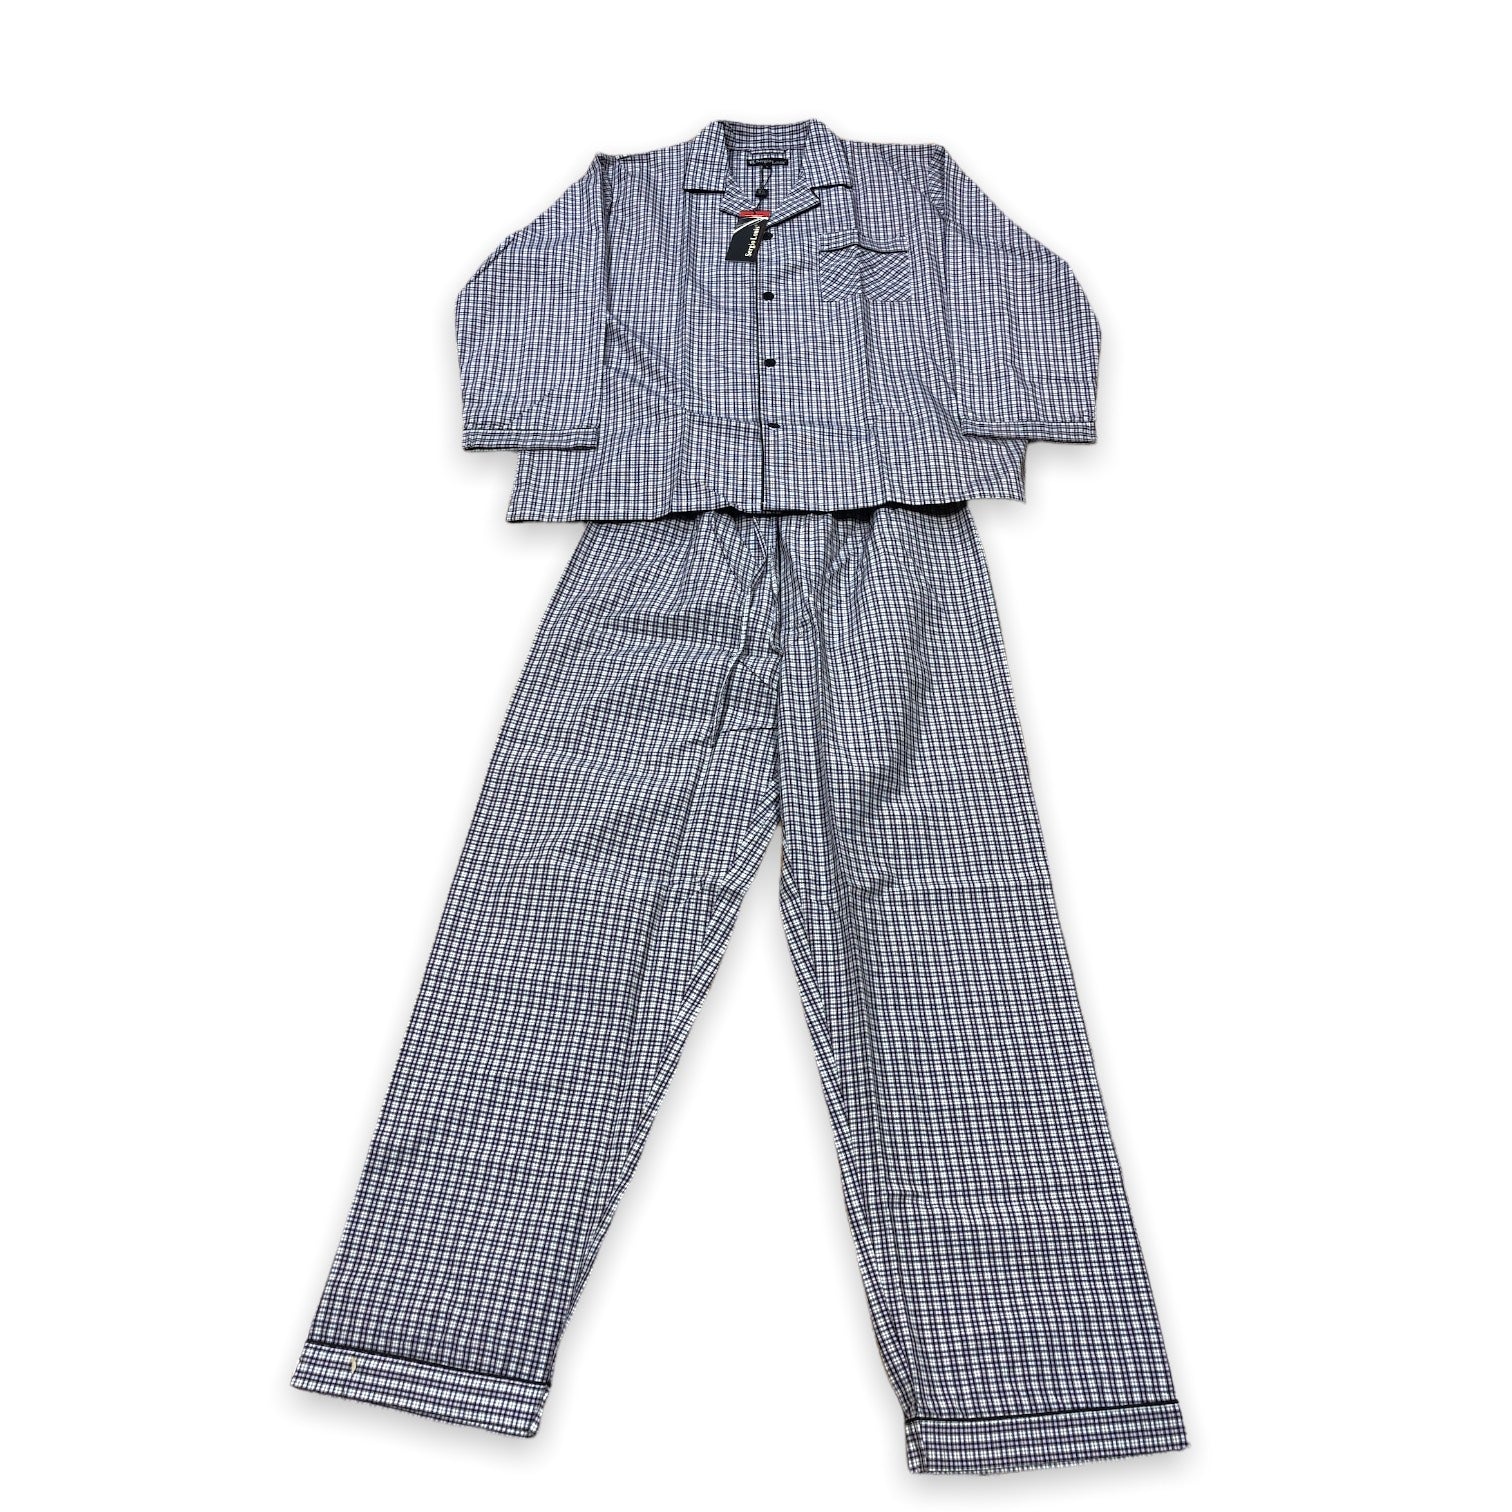 Men's Two Piece Poly Cotton Pajama Set with Matching Pants